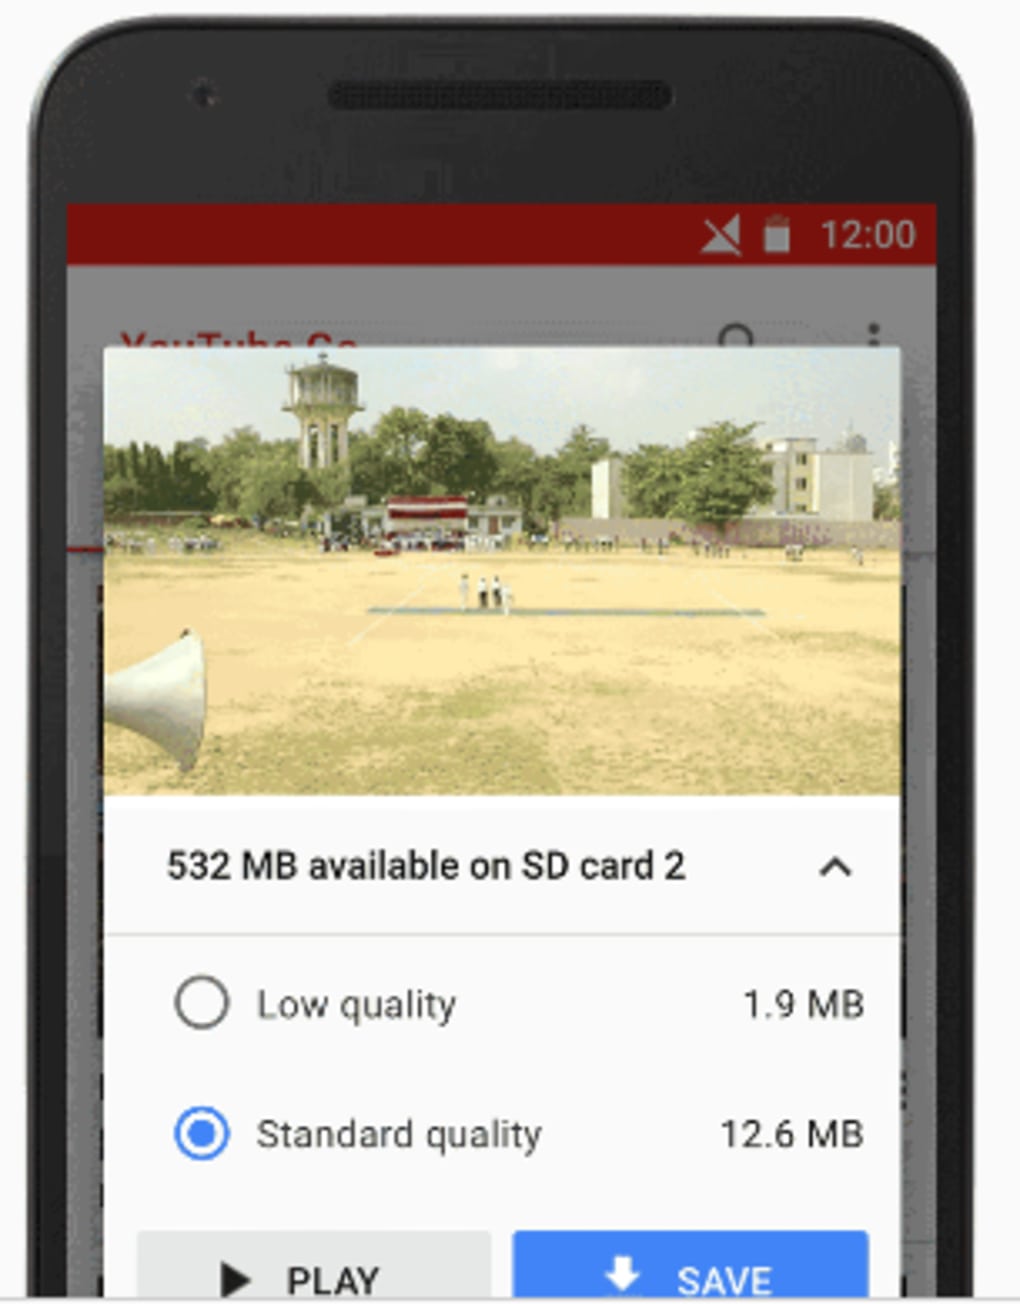 Youtube Apk Free Download For Android 4.0 - silentskiey